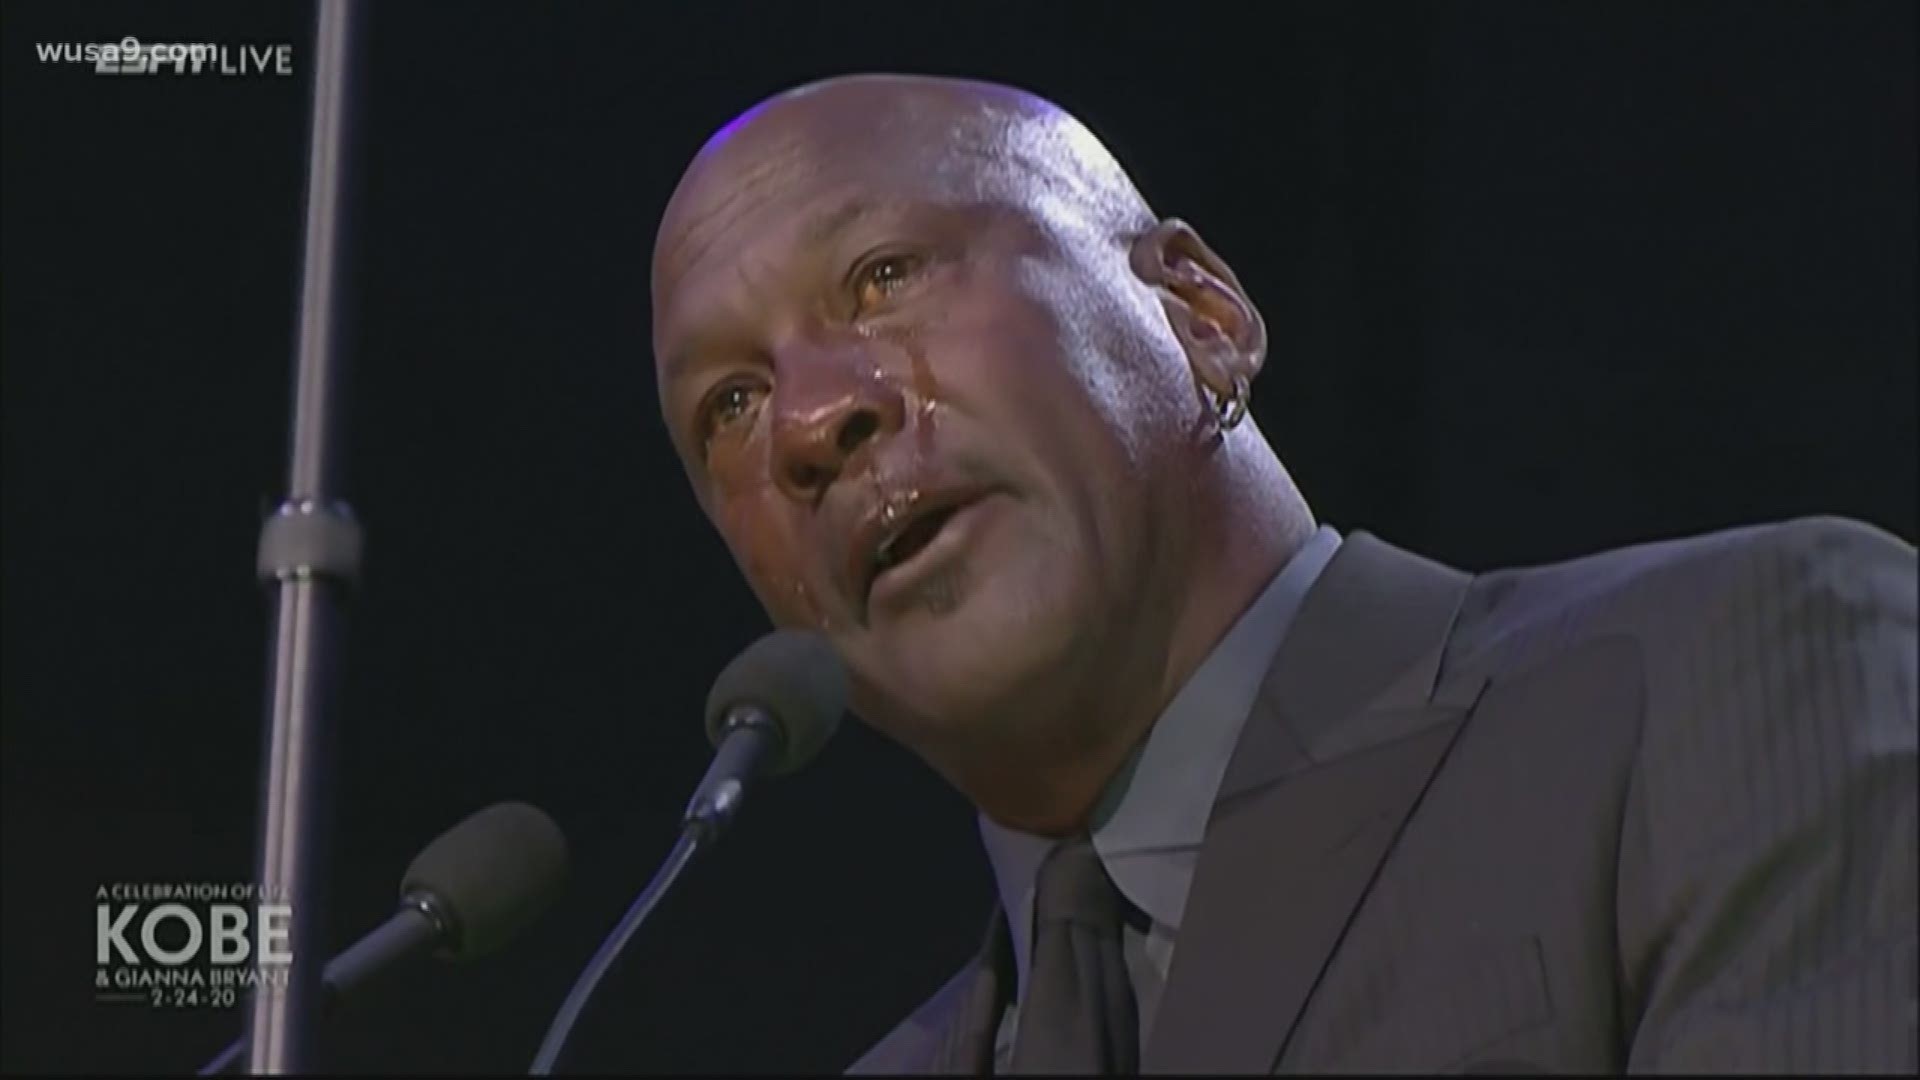 Lakers Video: Shaquille O'Neal Makes Heartfelt Speech About Making